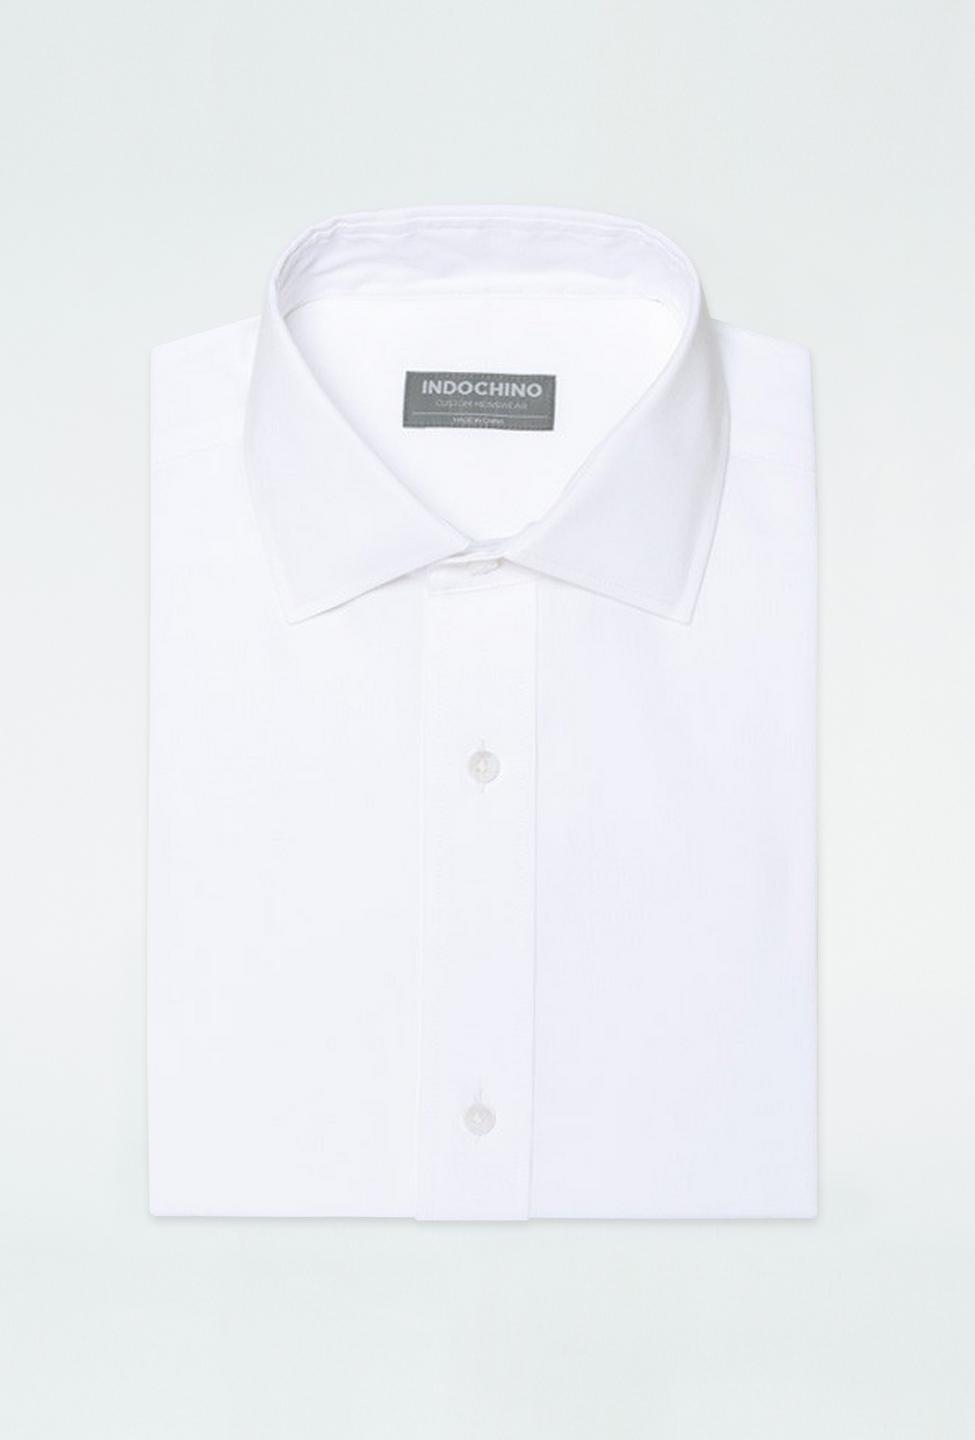 White shirt - Helmsley Solid Design from Premium Indochino Collection